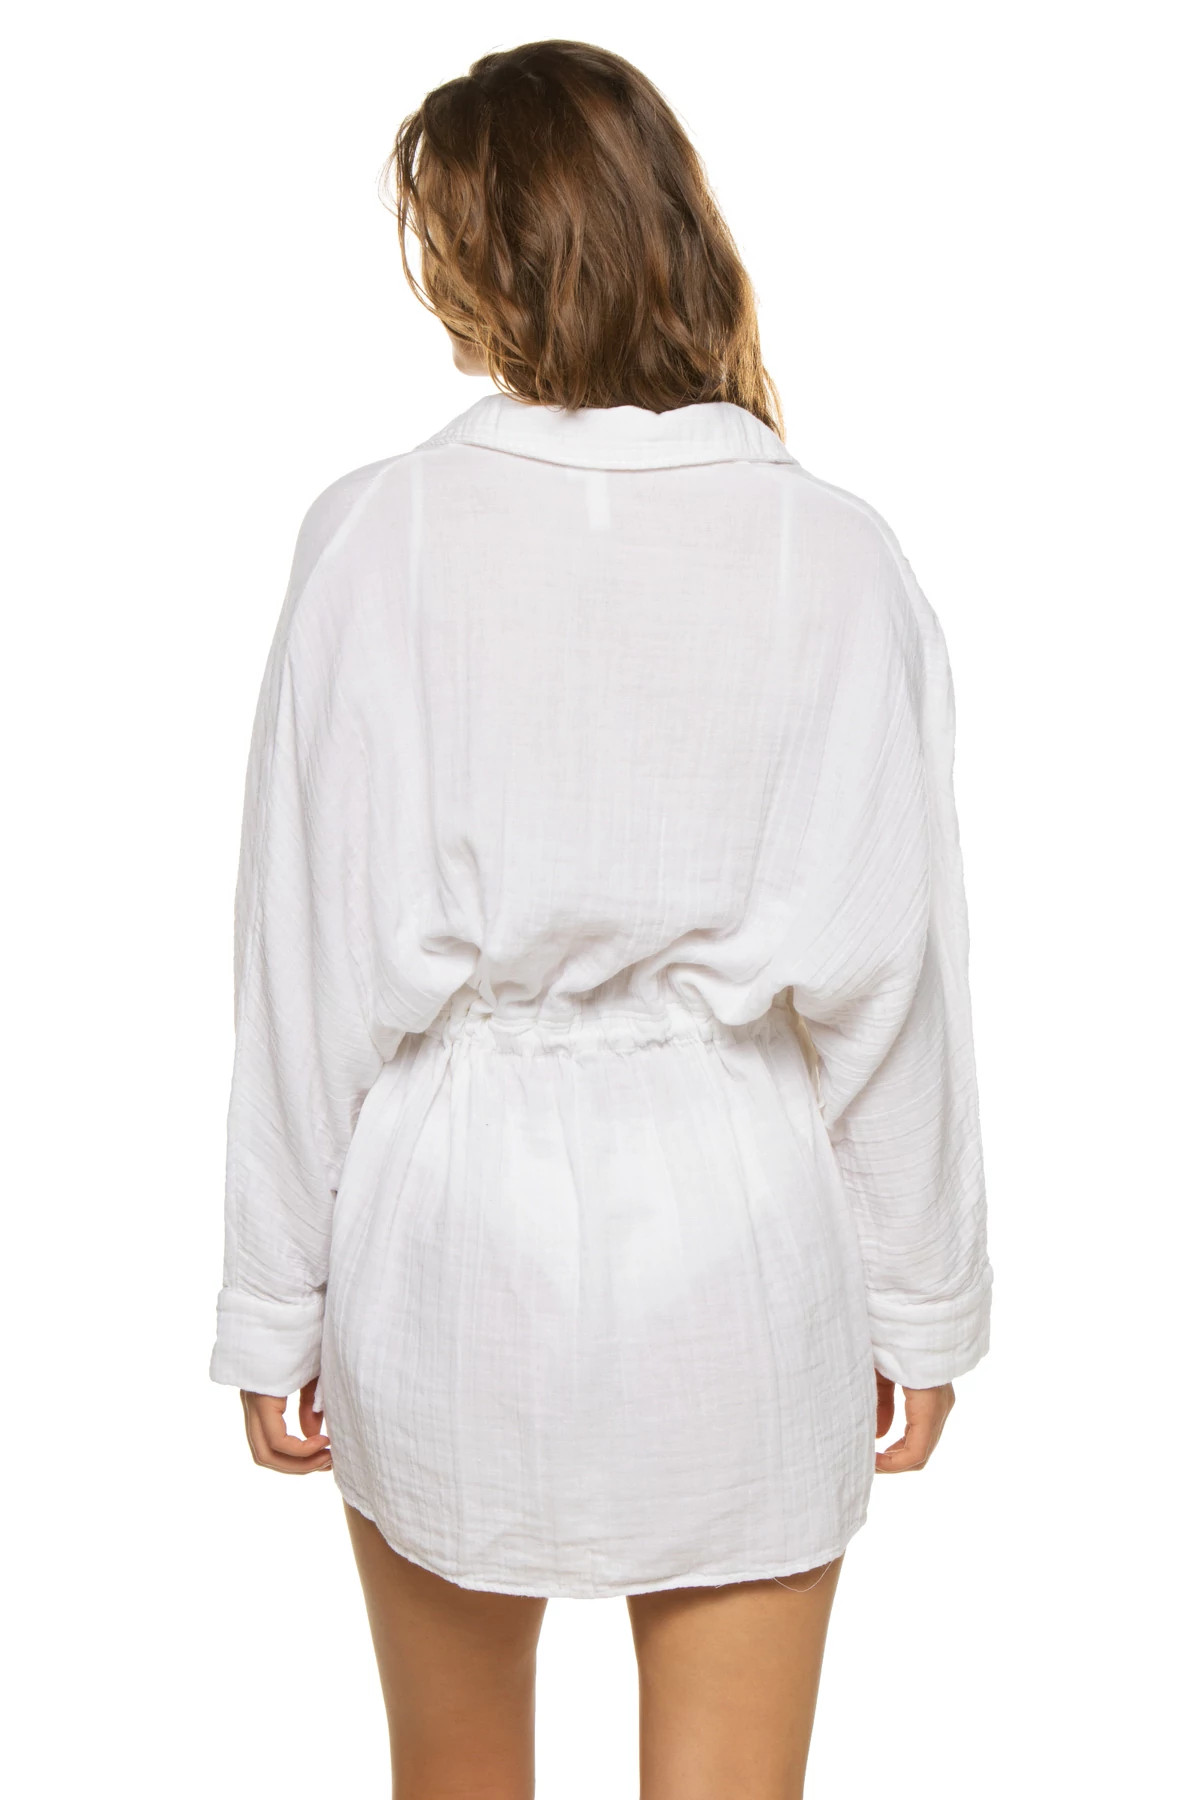 WHITE Short Button Up Shirt Dress image number 2